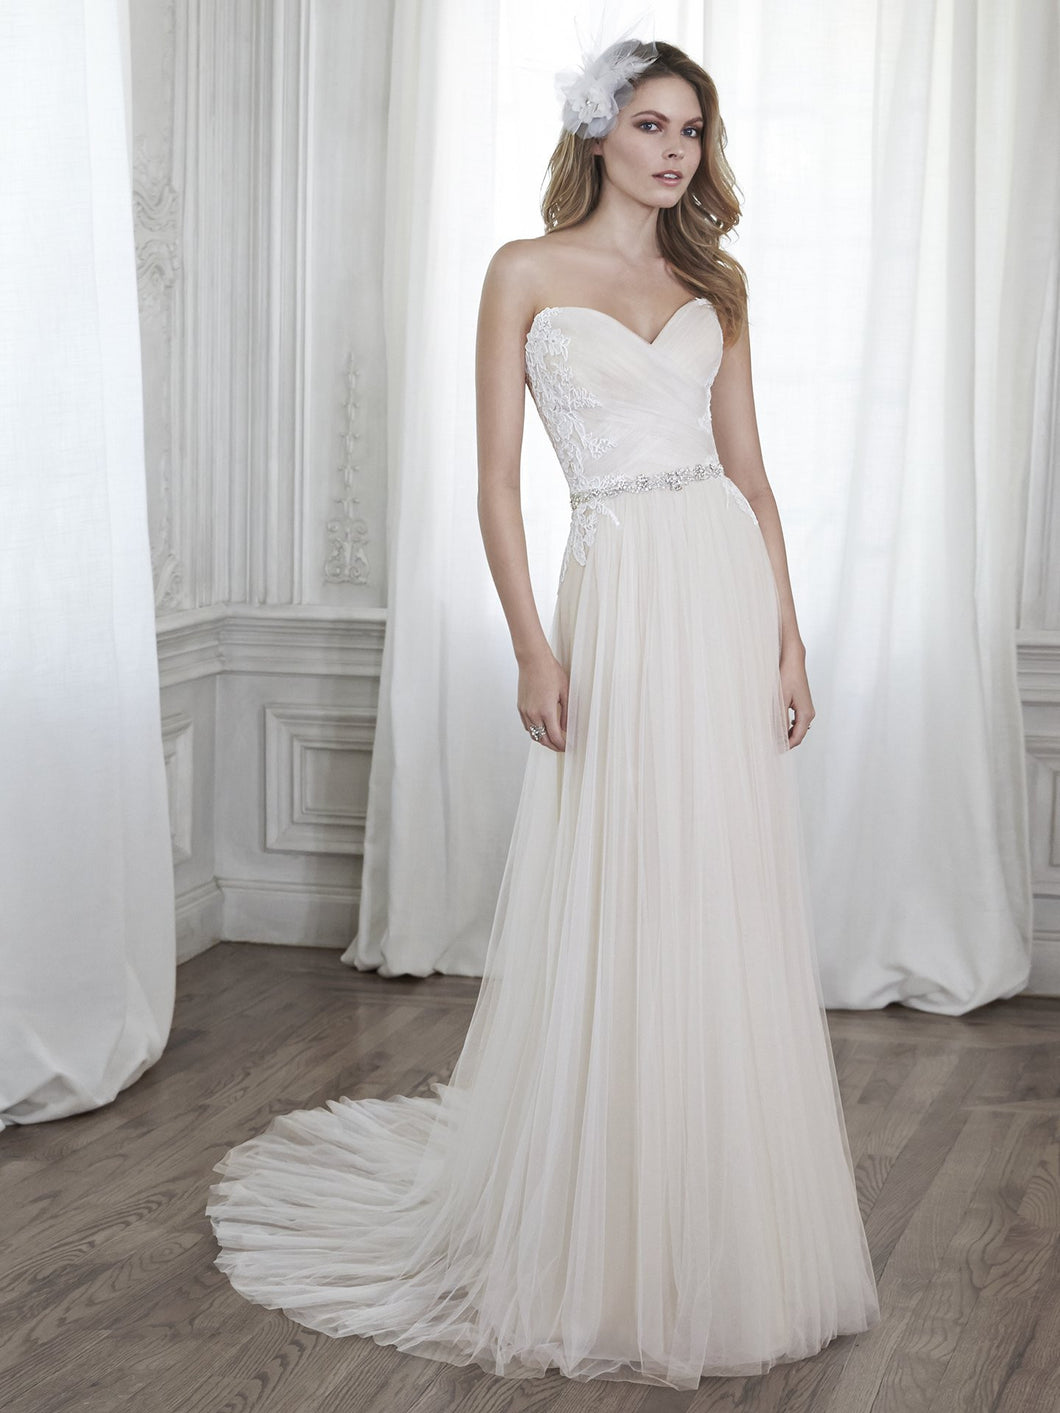 Maggie Sottero 'Patience' - Maggie Sottero - Nearly Newlywed Bridal Boutique - 1